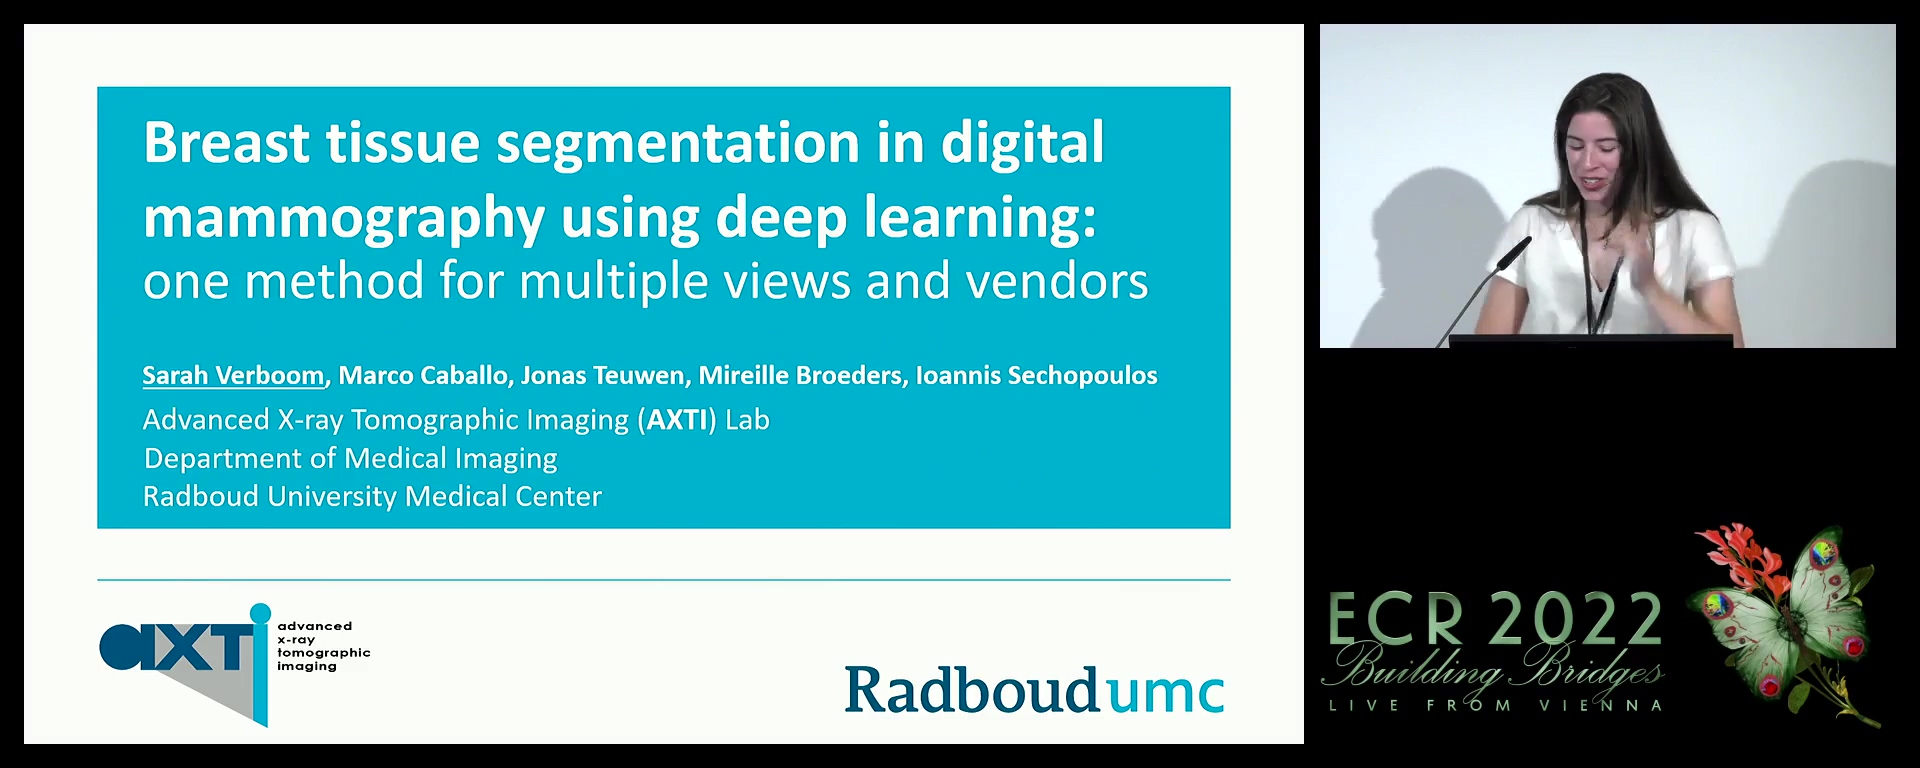 Breast tissue segmentation in digital mammography using deep learning: one method for multiple views and vendors - Sarah Verboom, Nijmegen / NL